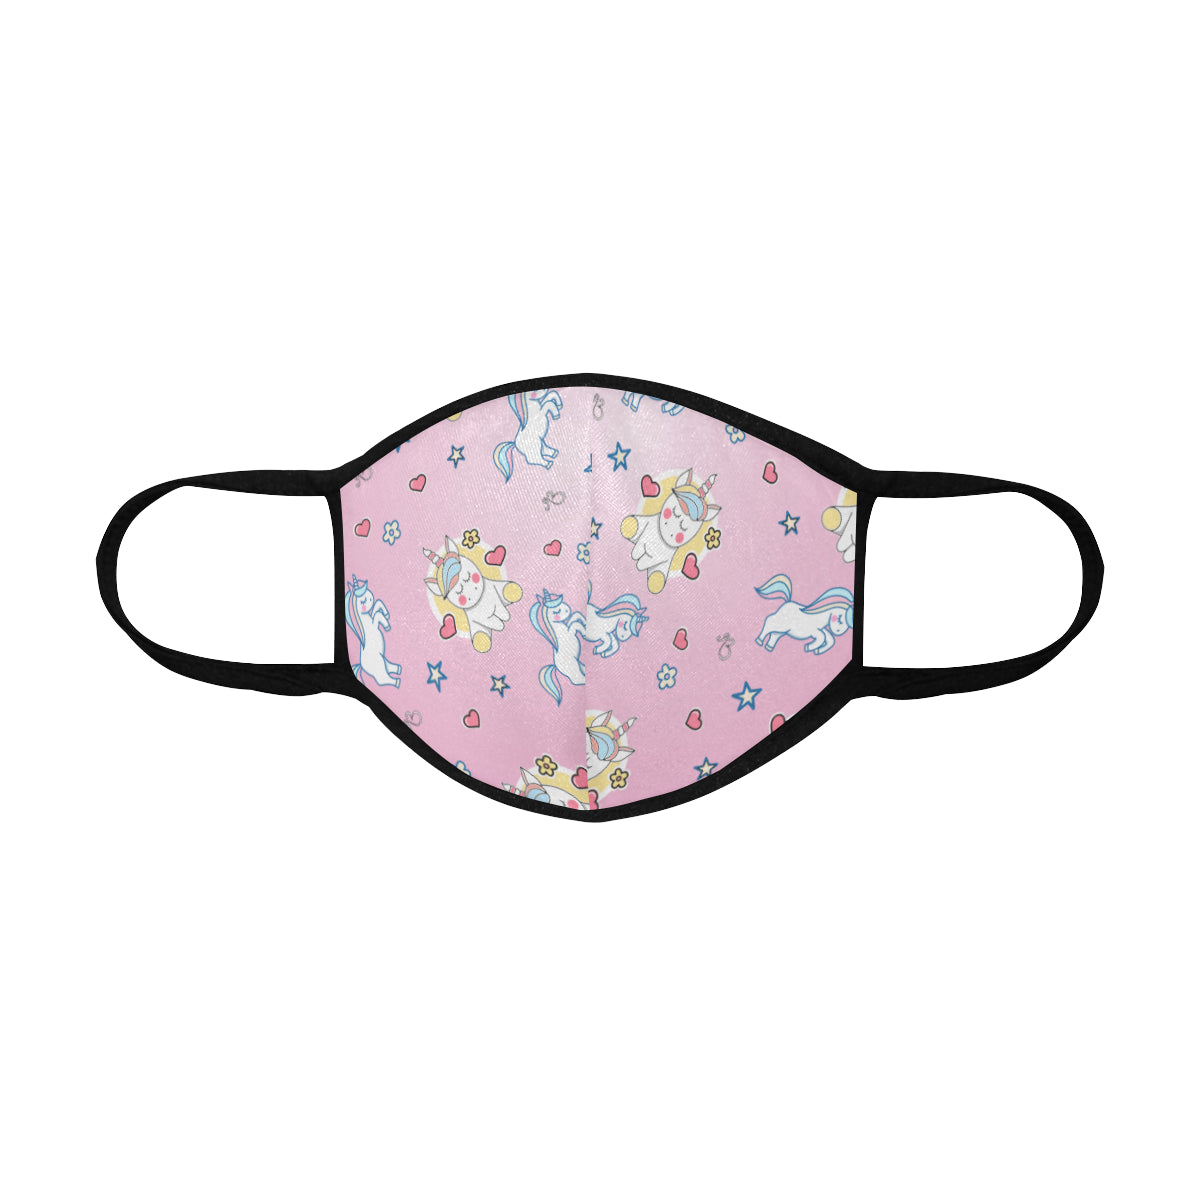 Unicorn Print Cotton Fabric Face Mask with filter slot (30 Filters Included) - Non-medical use